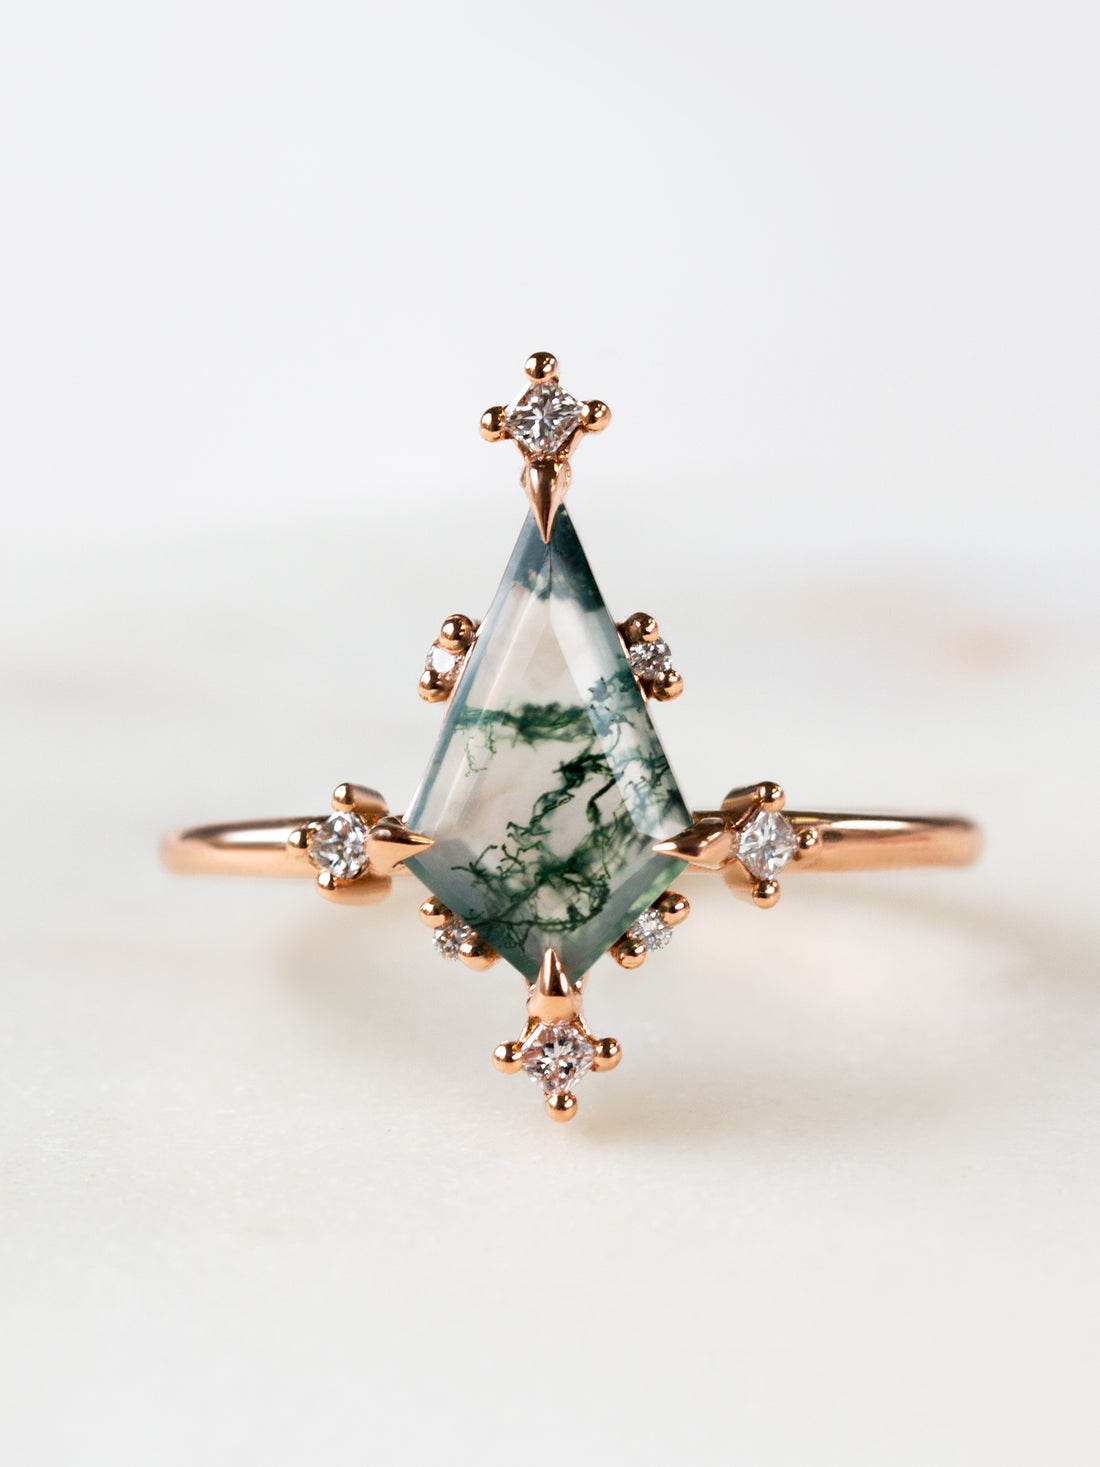 hiddenspace-engagement-ring-moss-agate-maeve-proposal-ring-unique-artdeco-designer-ring-finejewelry-1